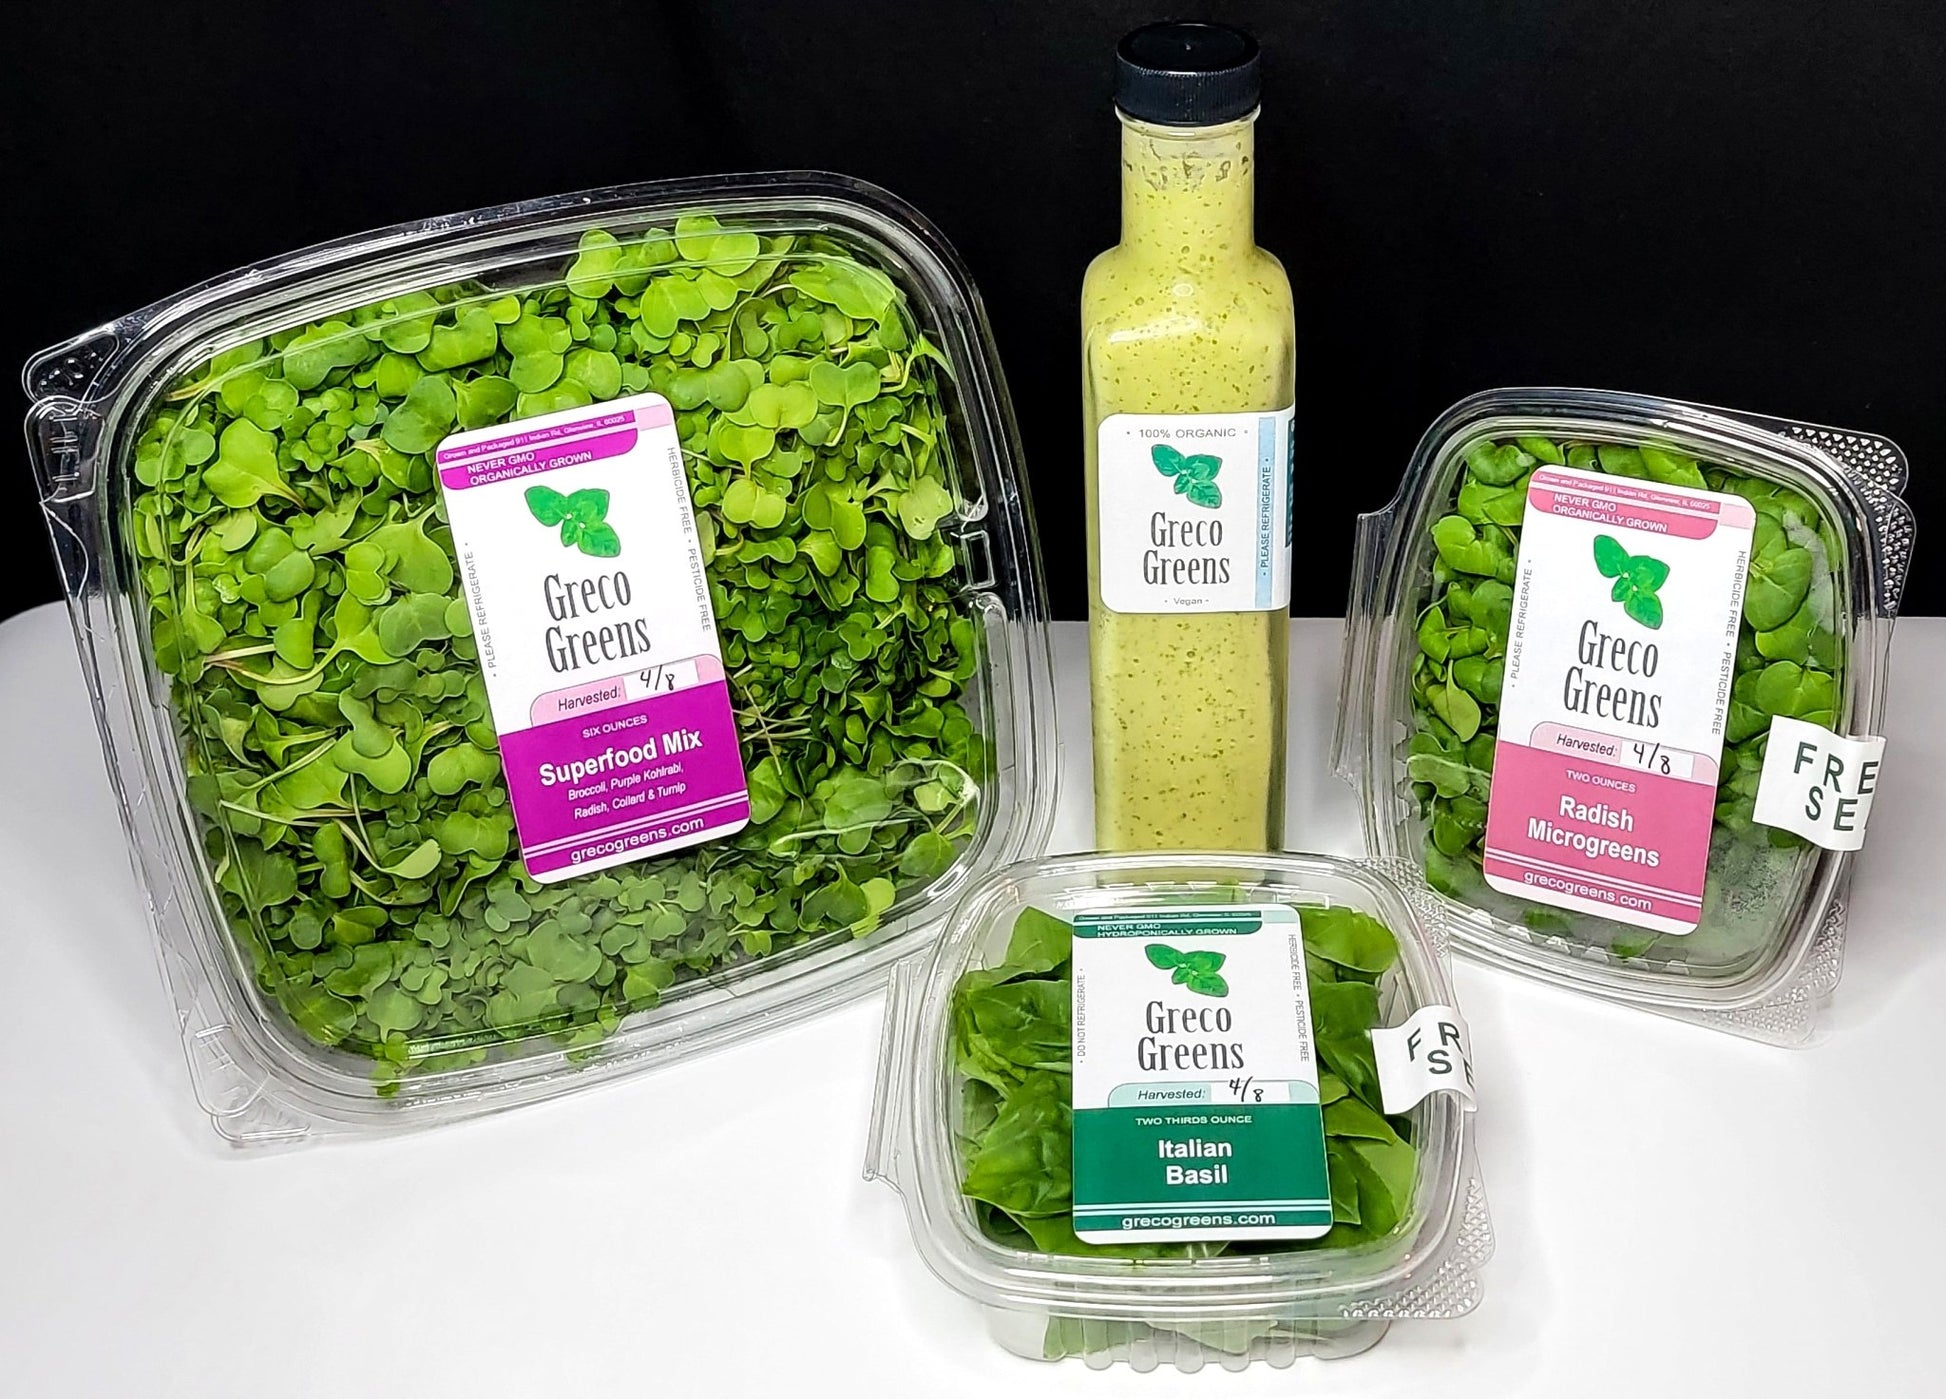 Family UPick Crate - Greco Greens